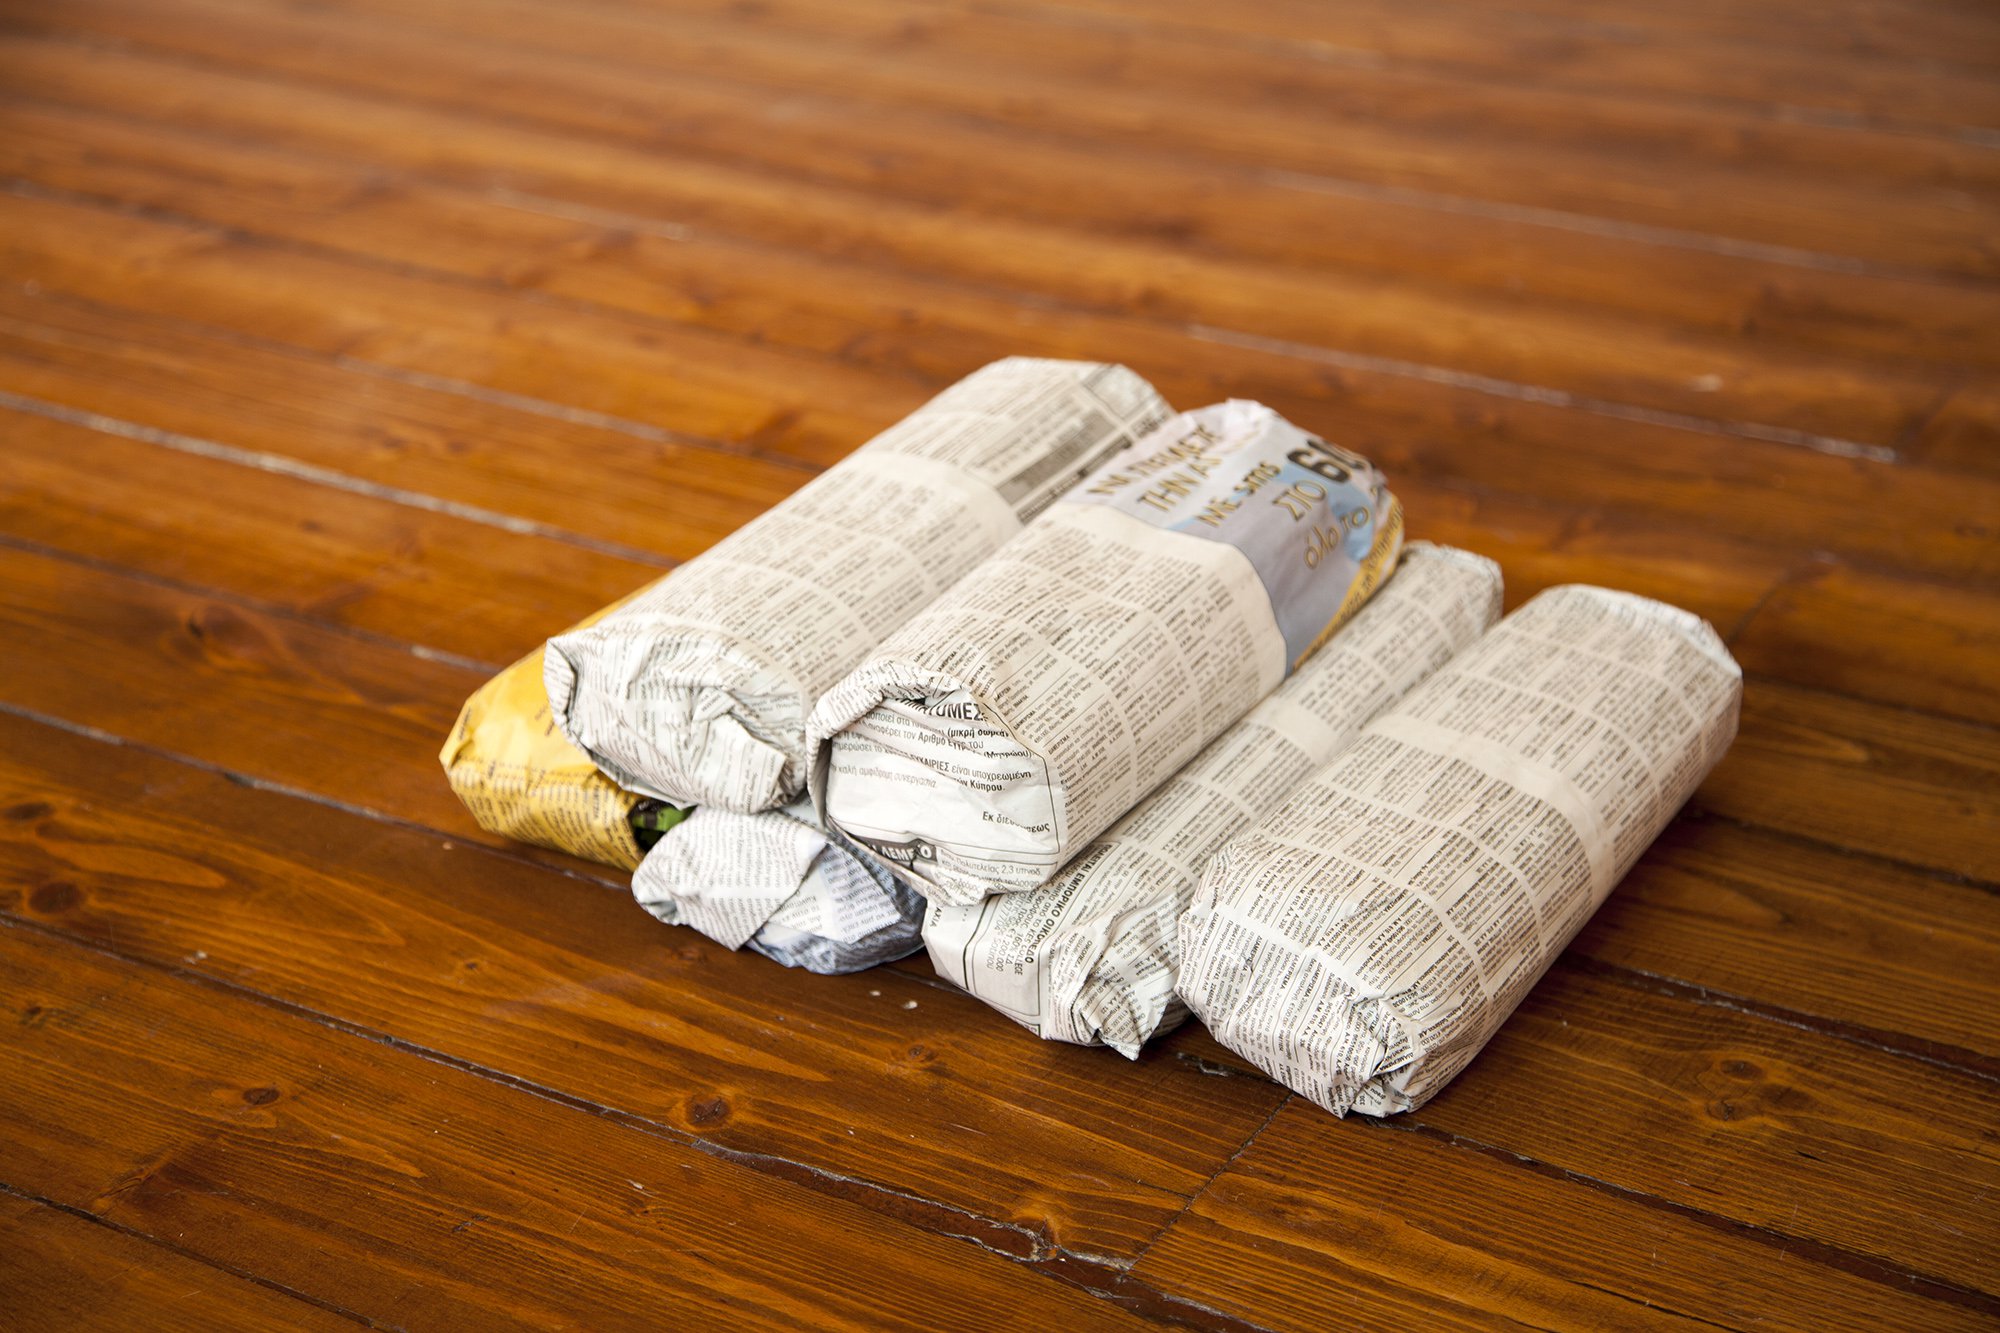 Christodoulos Panayiotou, Untitled, 6 candle bundles wrapped in newspaper of 1 kg each, dimensions variable, 2012